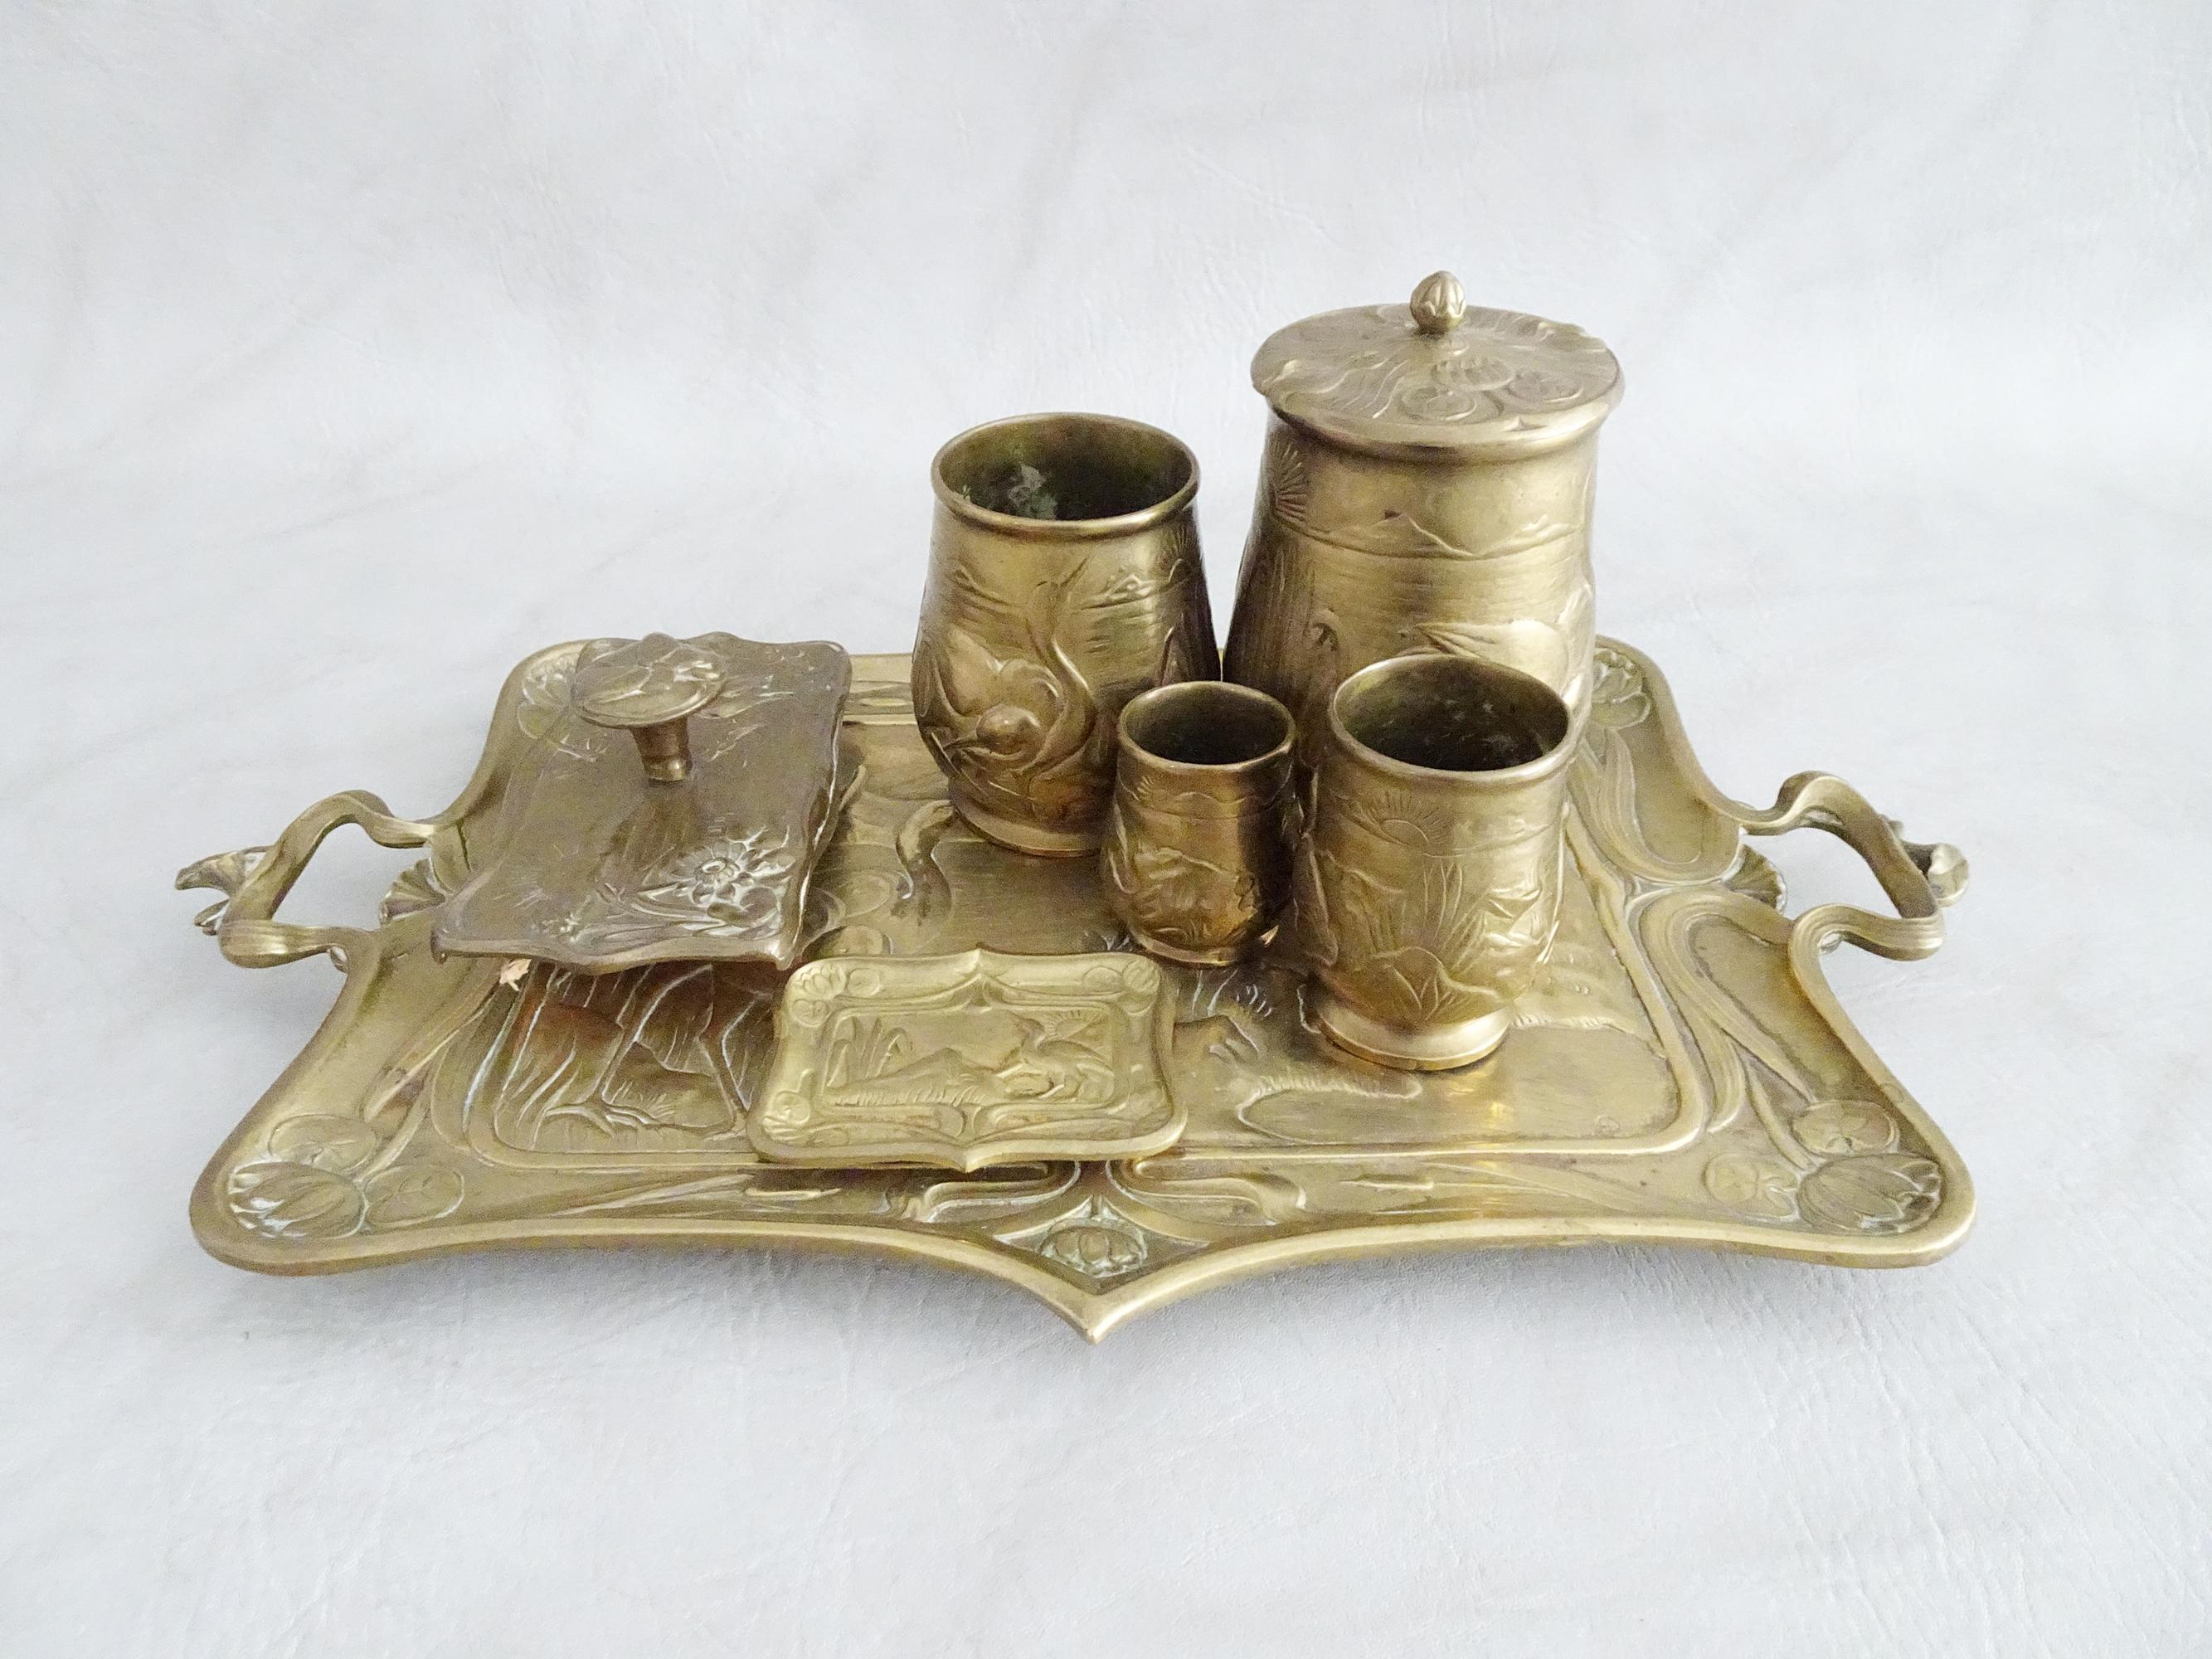 Stylish French Original Art Nouveau desk set made of bronze. The high-quality set consists of seven parts and is made of heavy bronze. Beautifully worked in detail with a scenery of herons on the water.

The brass set consists of a large tray, a